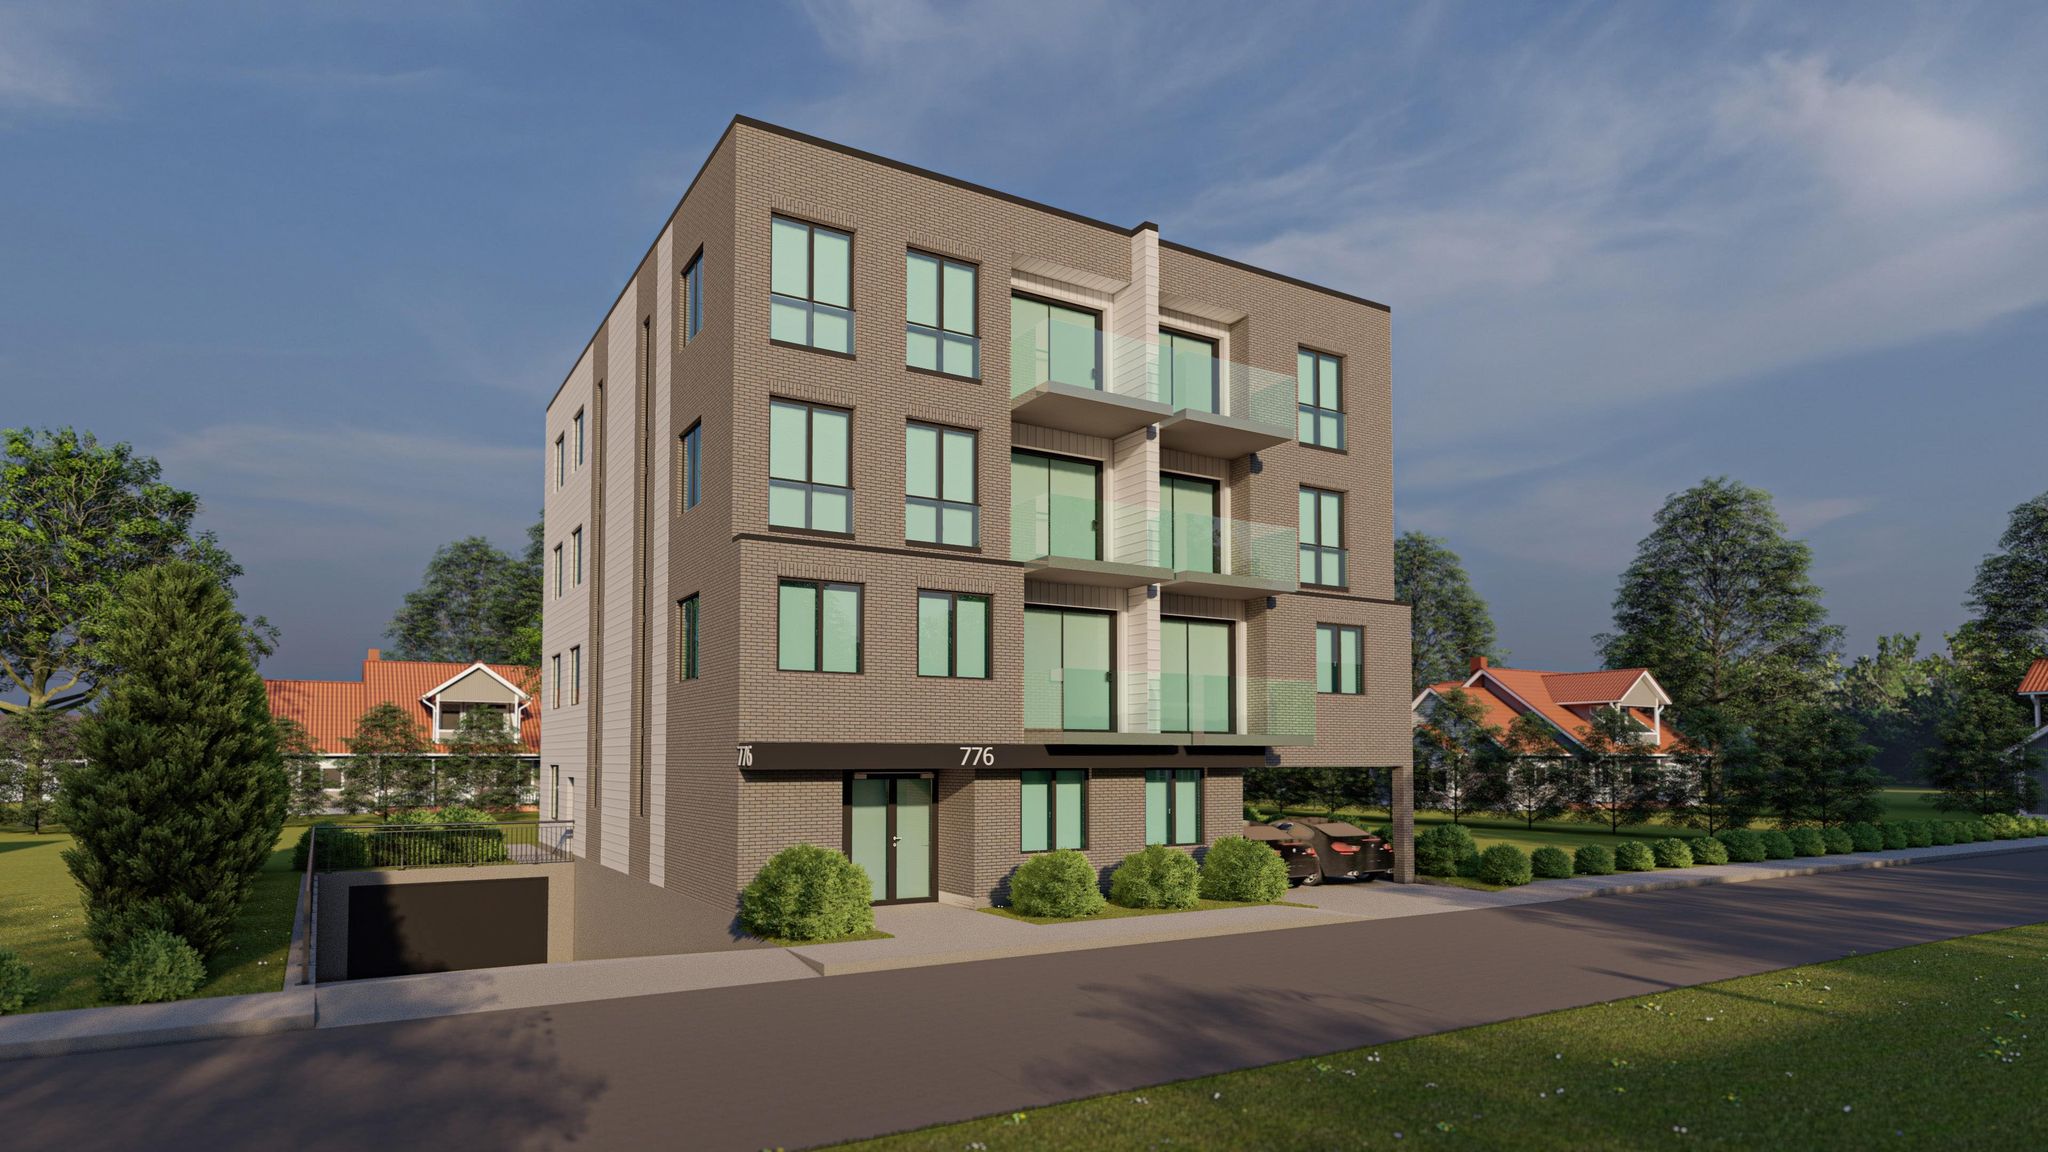 A 15 unit rental project in Lachine